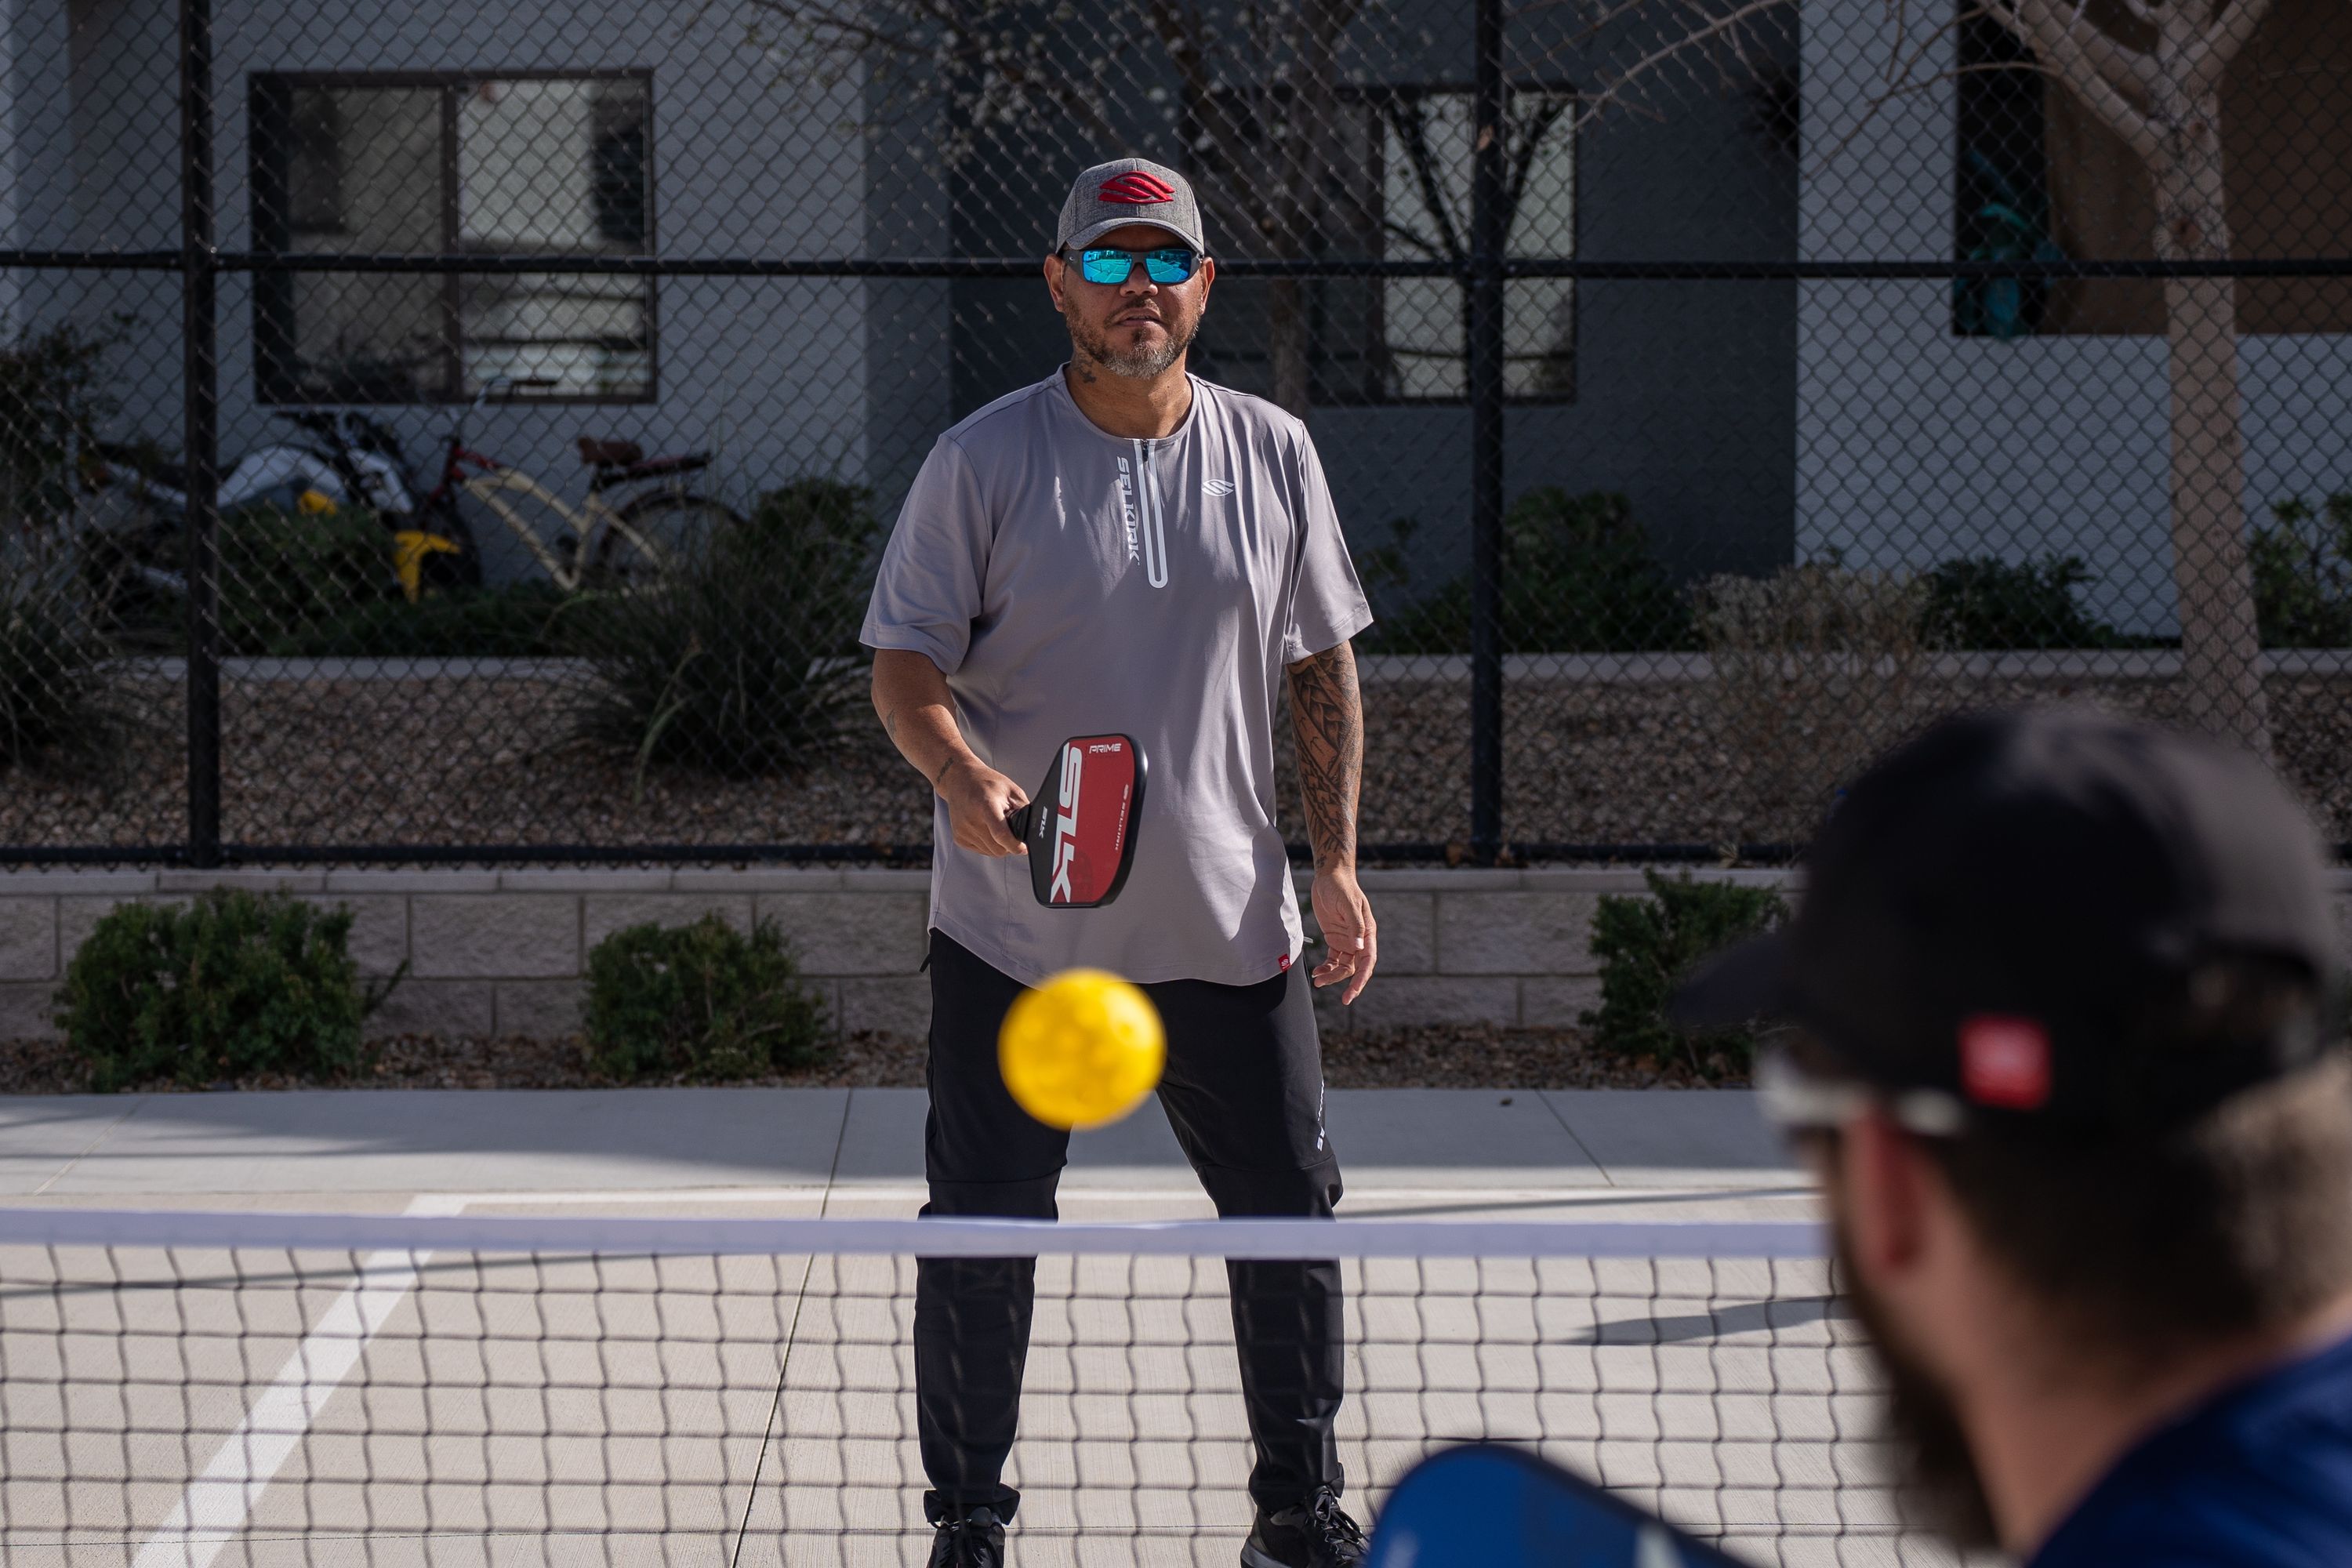 what is a pickleball hinder, and how is it going to affect your game?